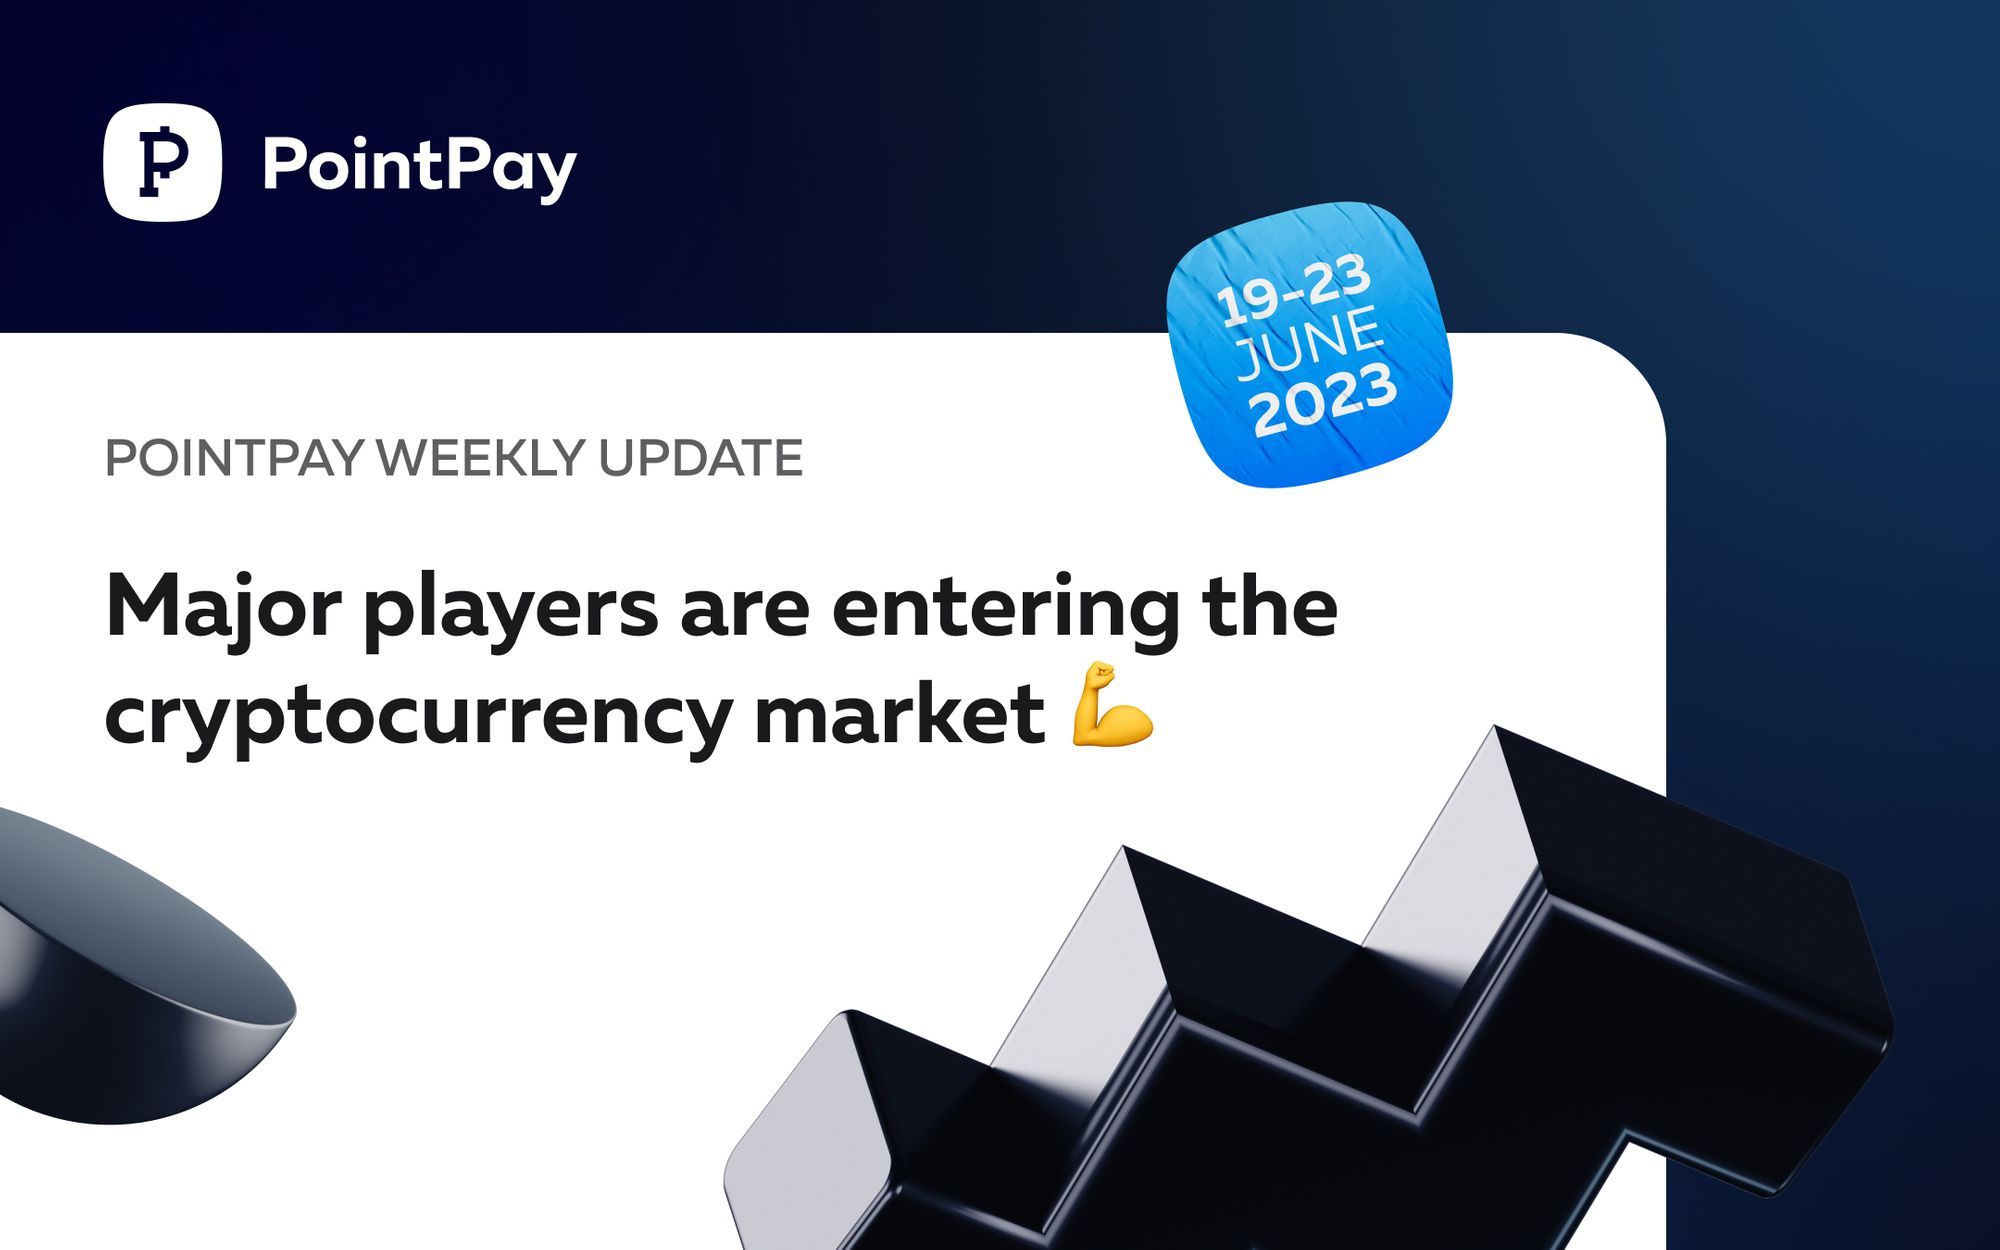 PointPay Weekly Update (19 - 23 June 2023)